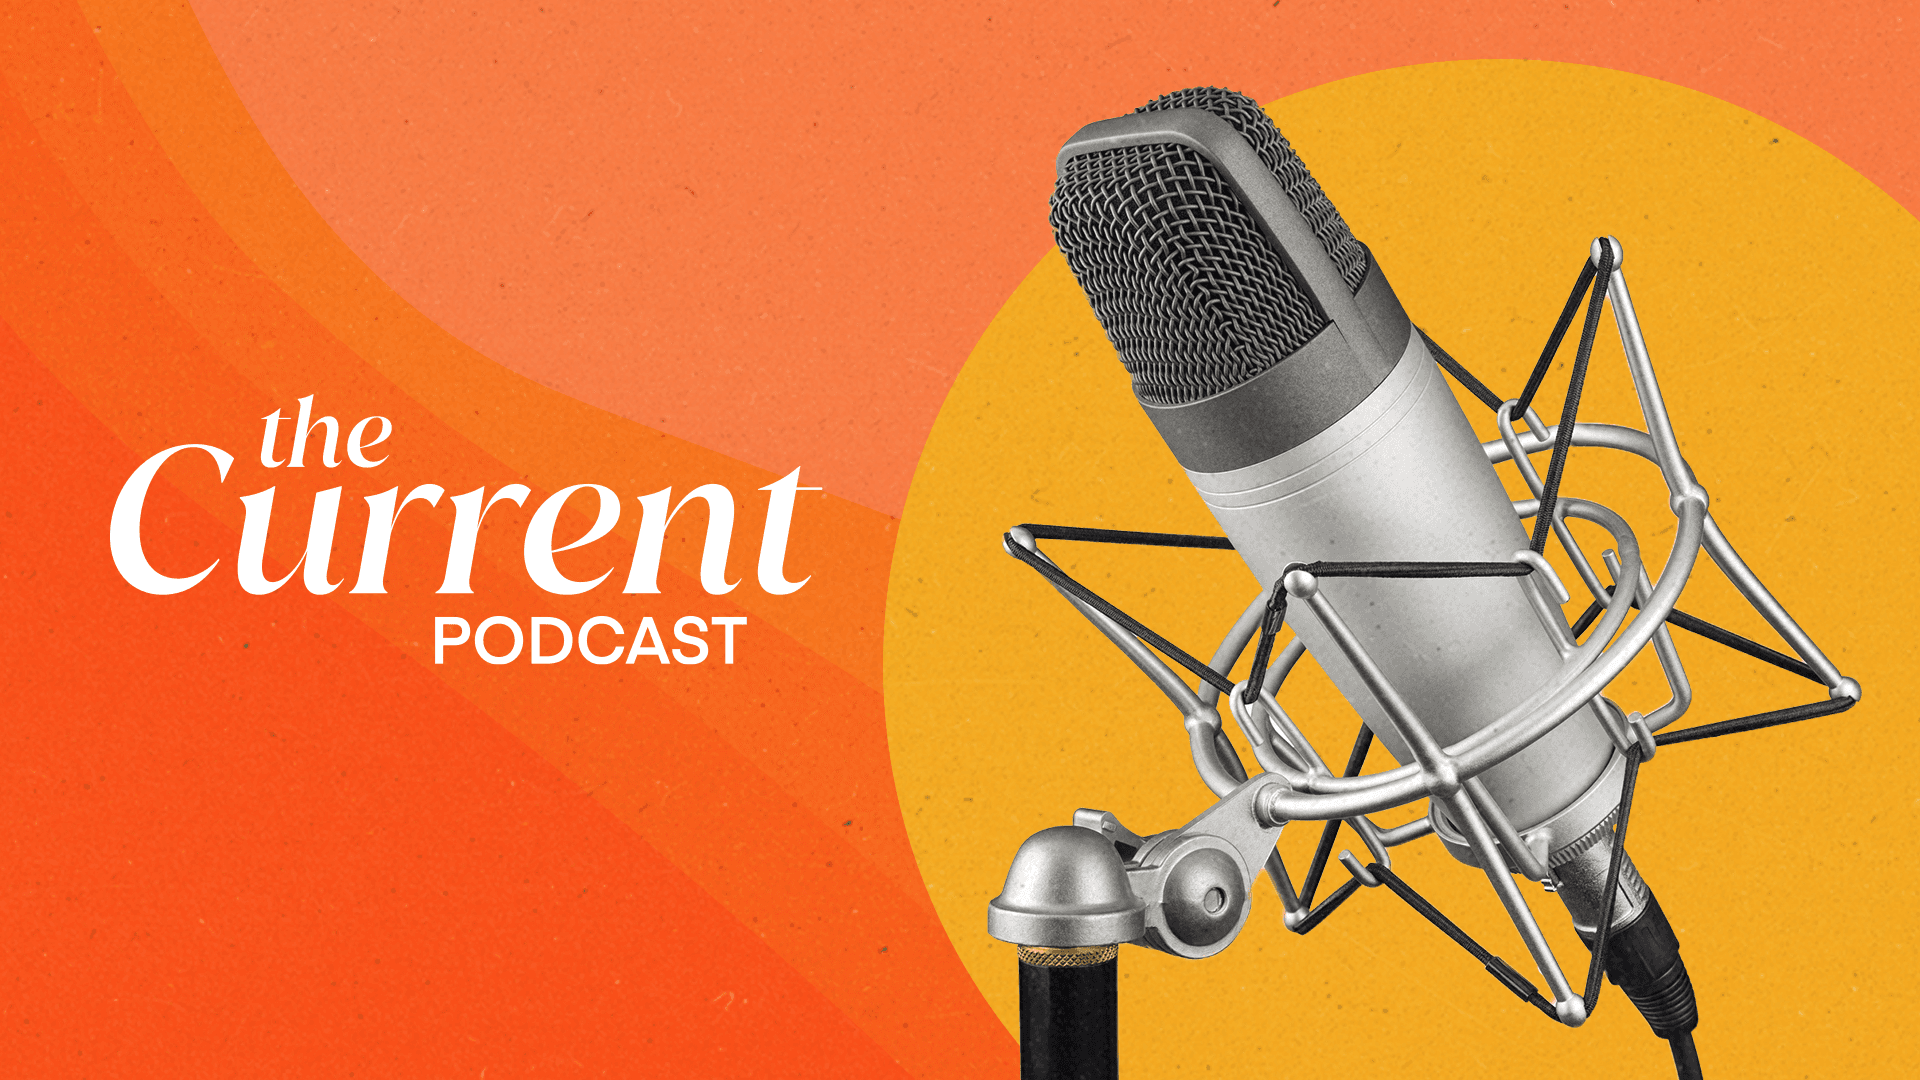 Introducing: The Current podcast